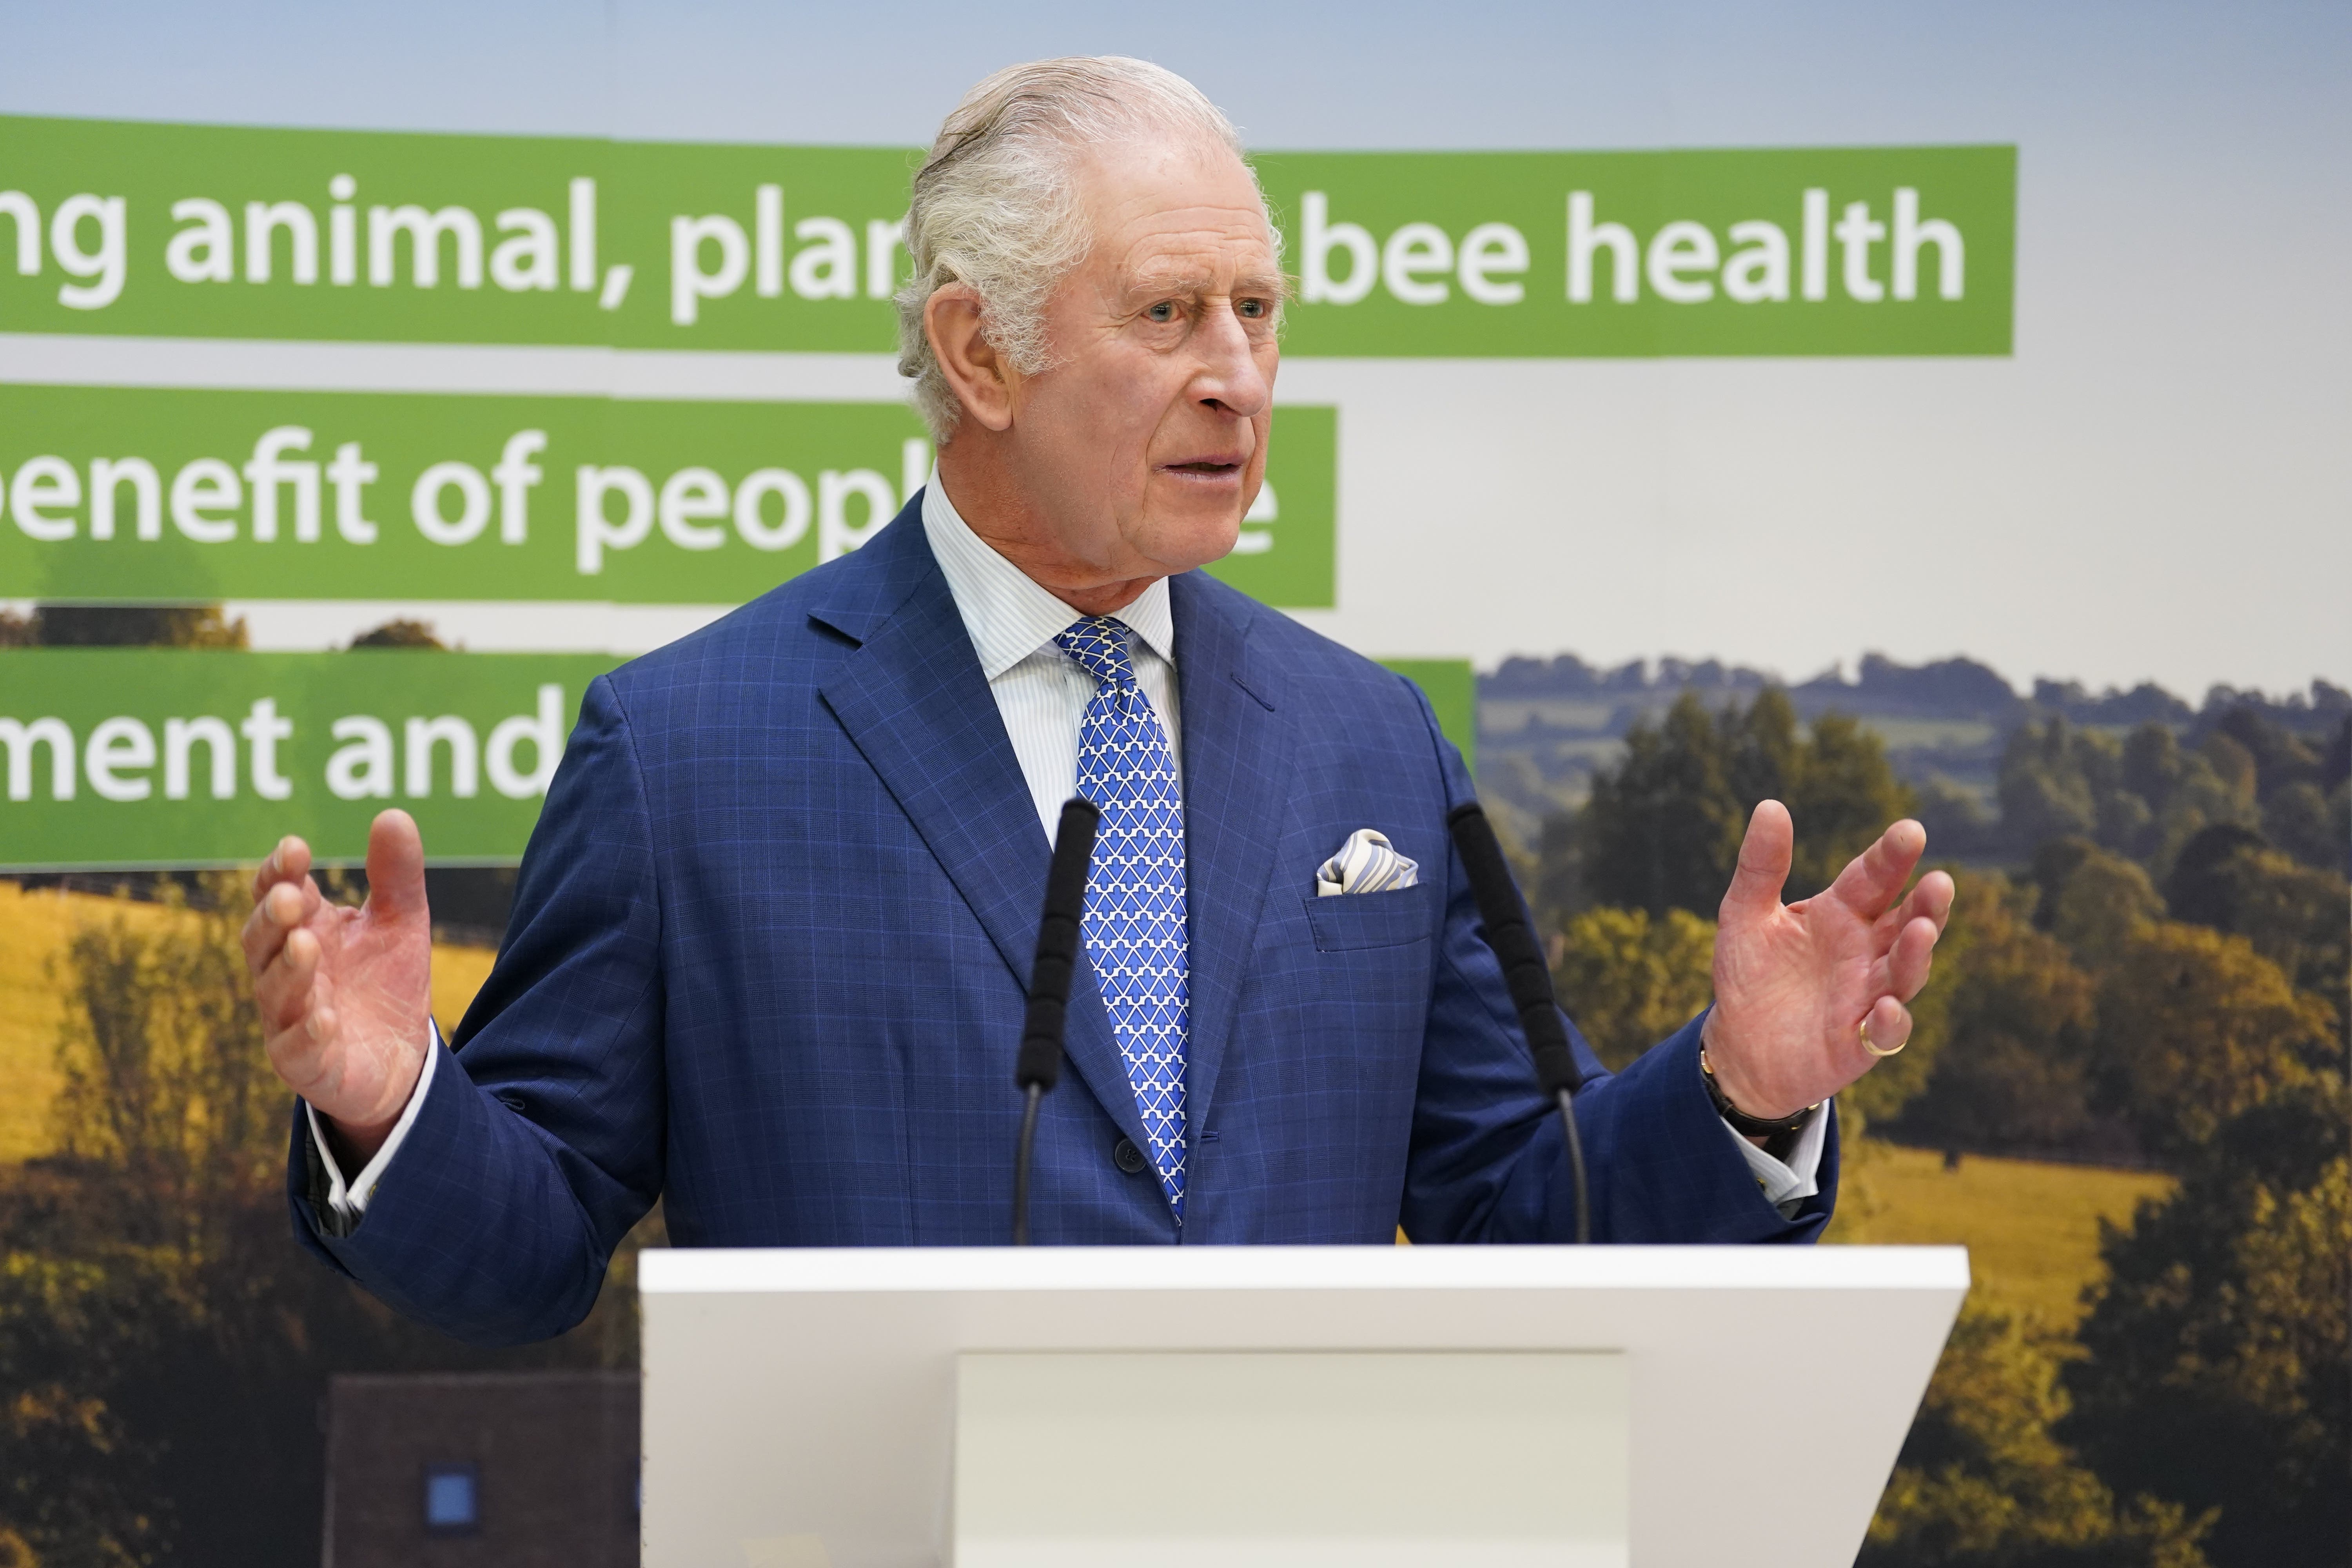 The King speaking during a visit to the Animal and Plant Health Agency in Addlestone (Andrew Matthews/PA)